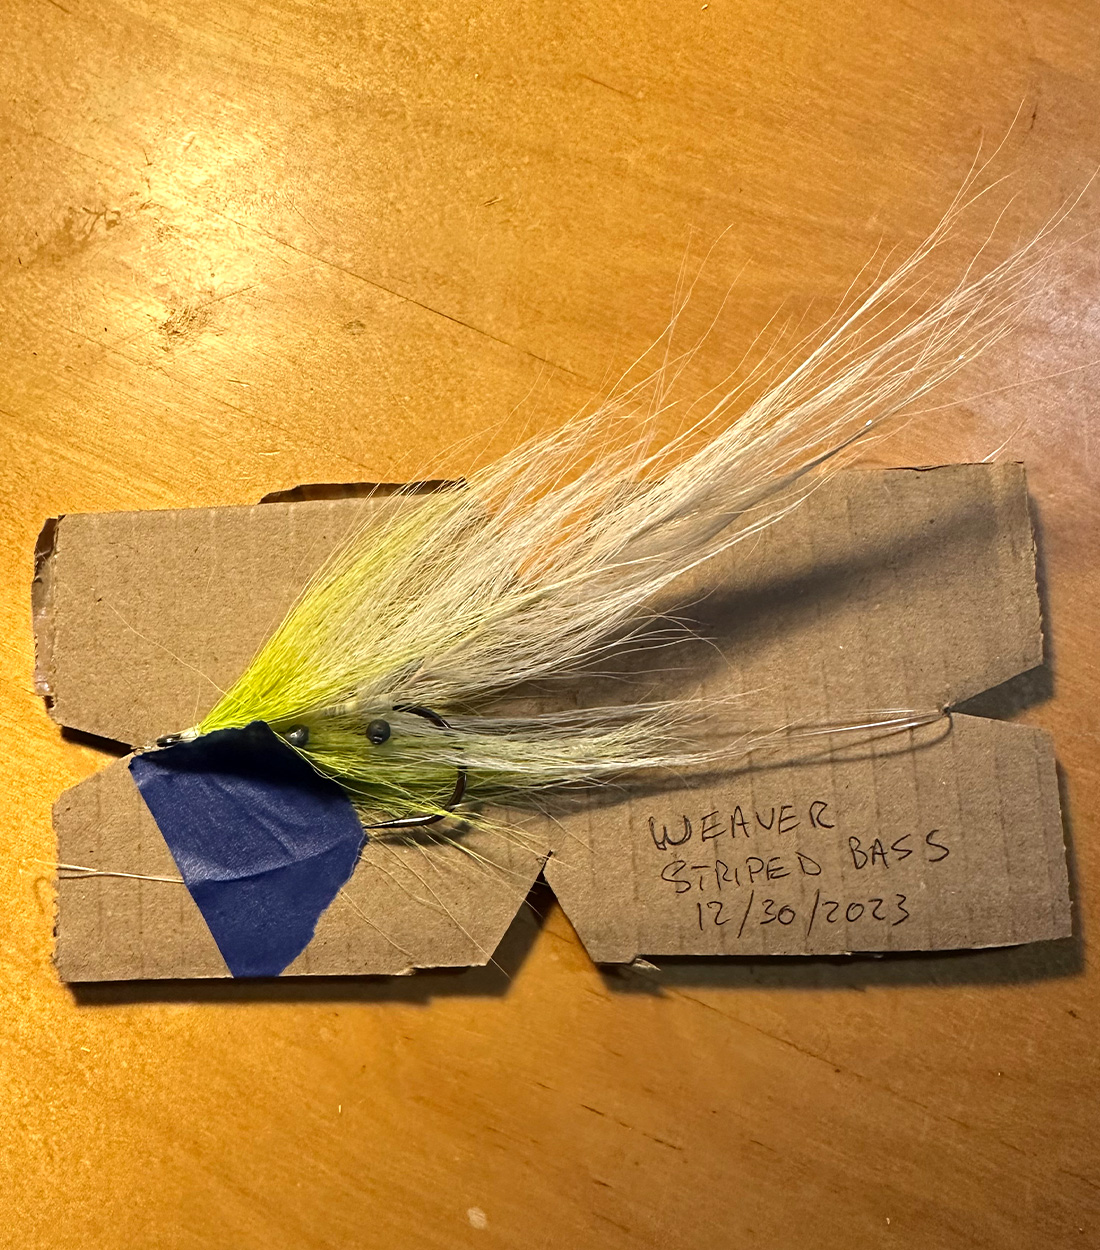 A fly for striped bass.